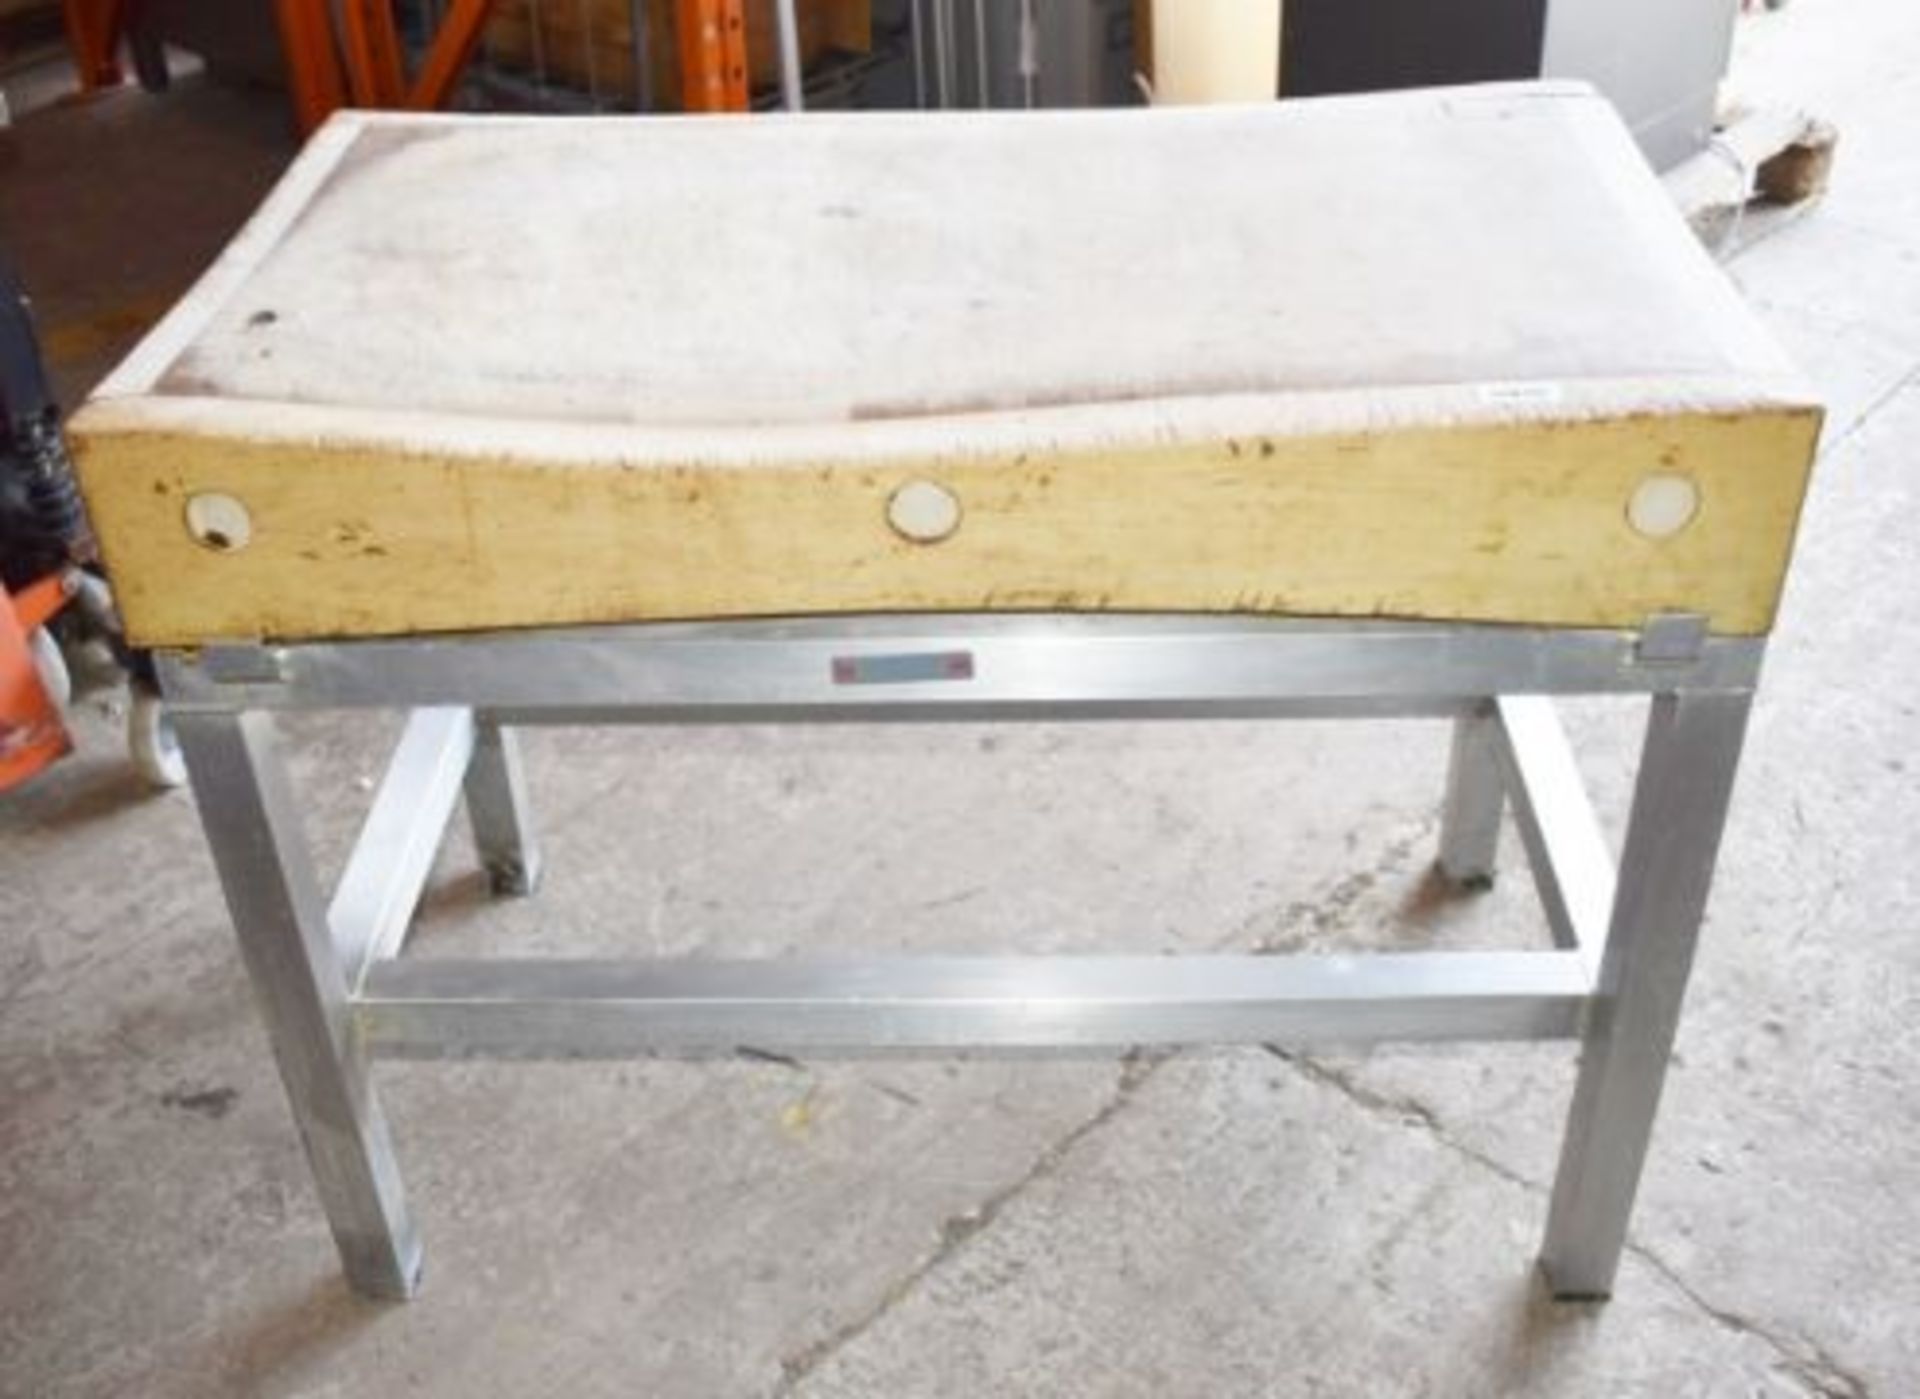 1 x Large Butchers Block Chopping Board on Fabricated Stainless Steel Stand - 16cm Thick Block - - Image 5 of 7